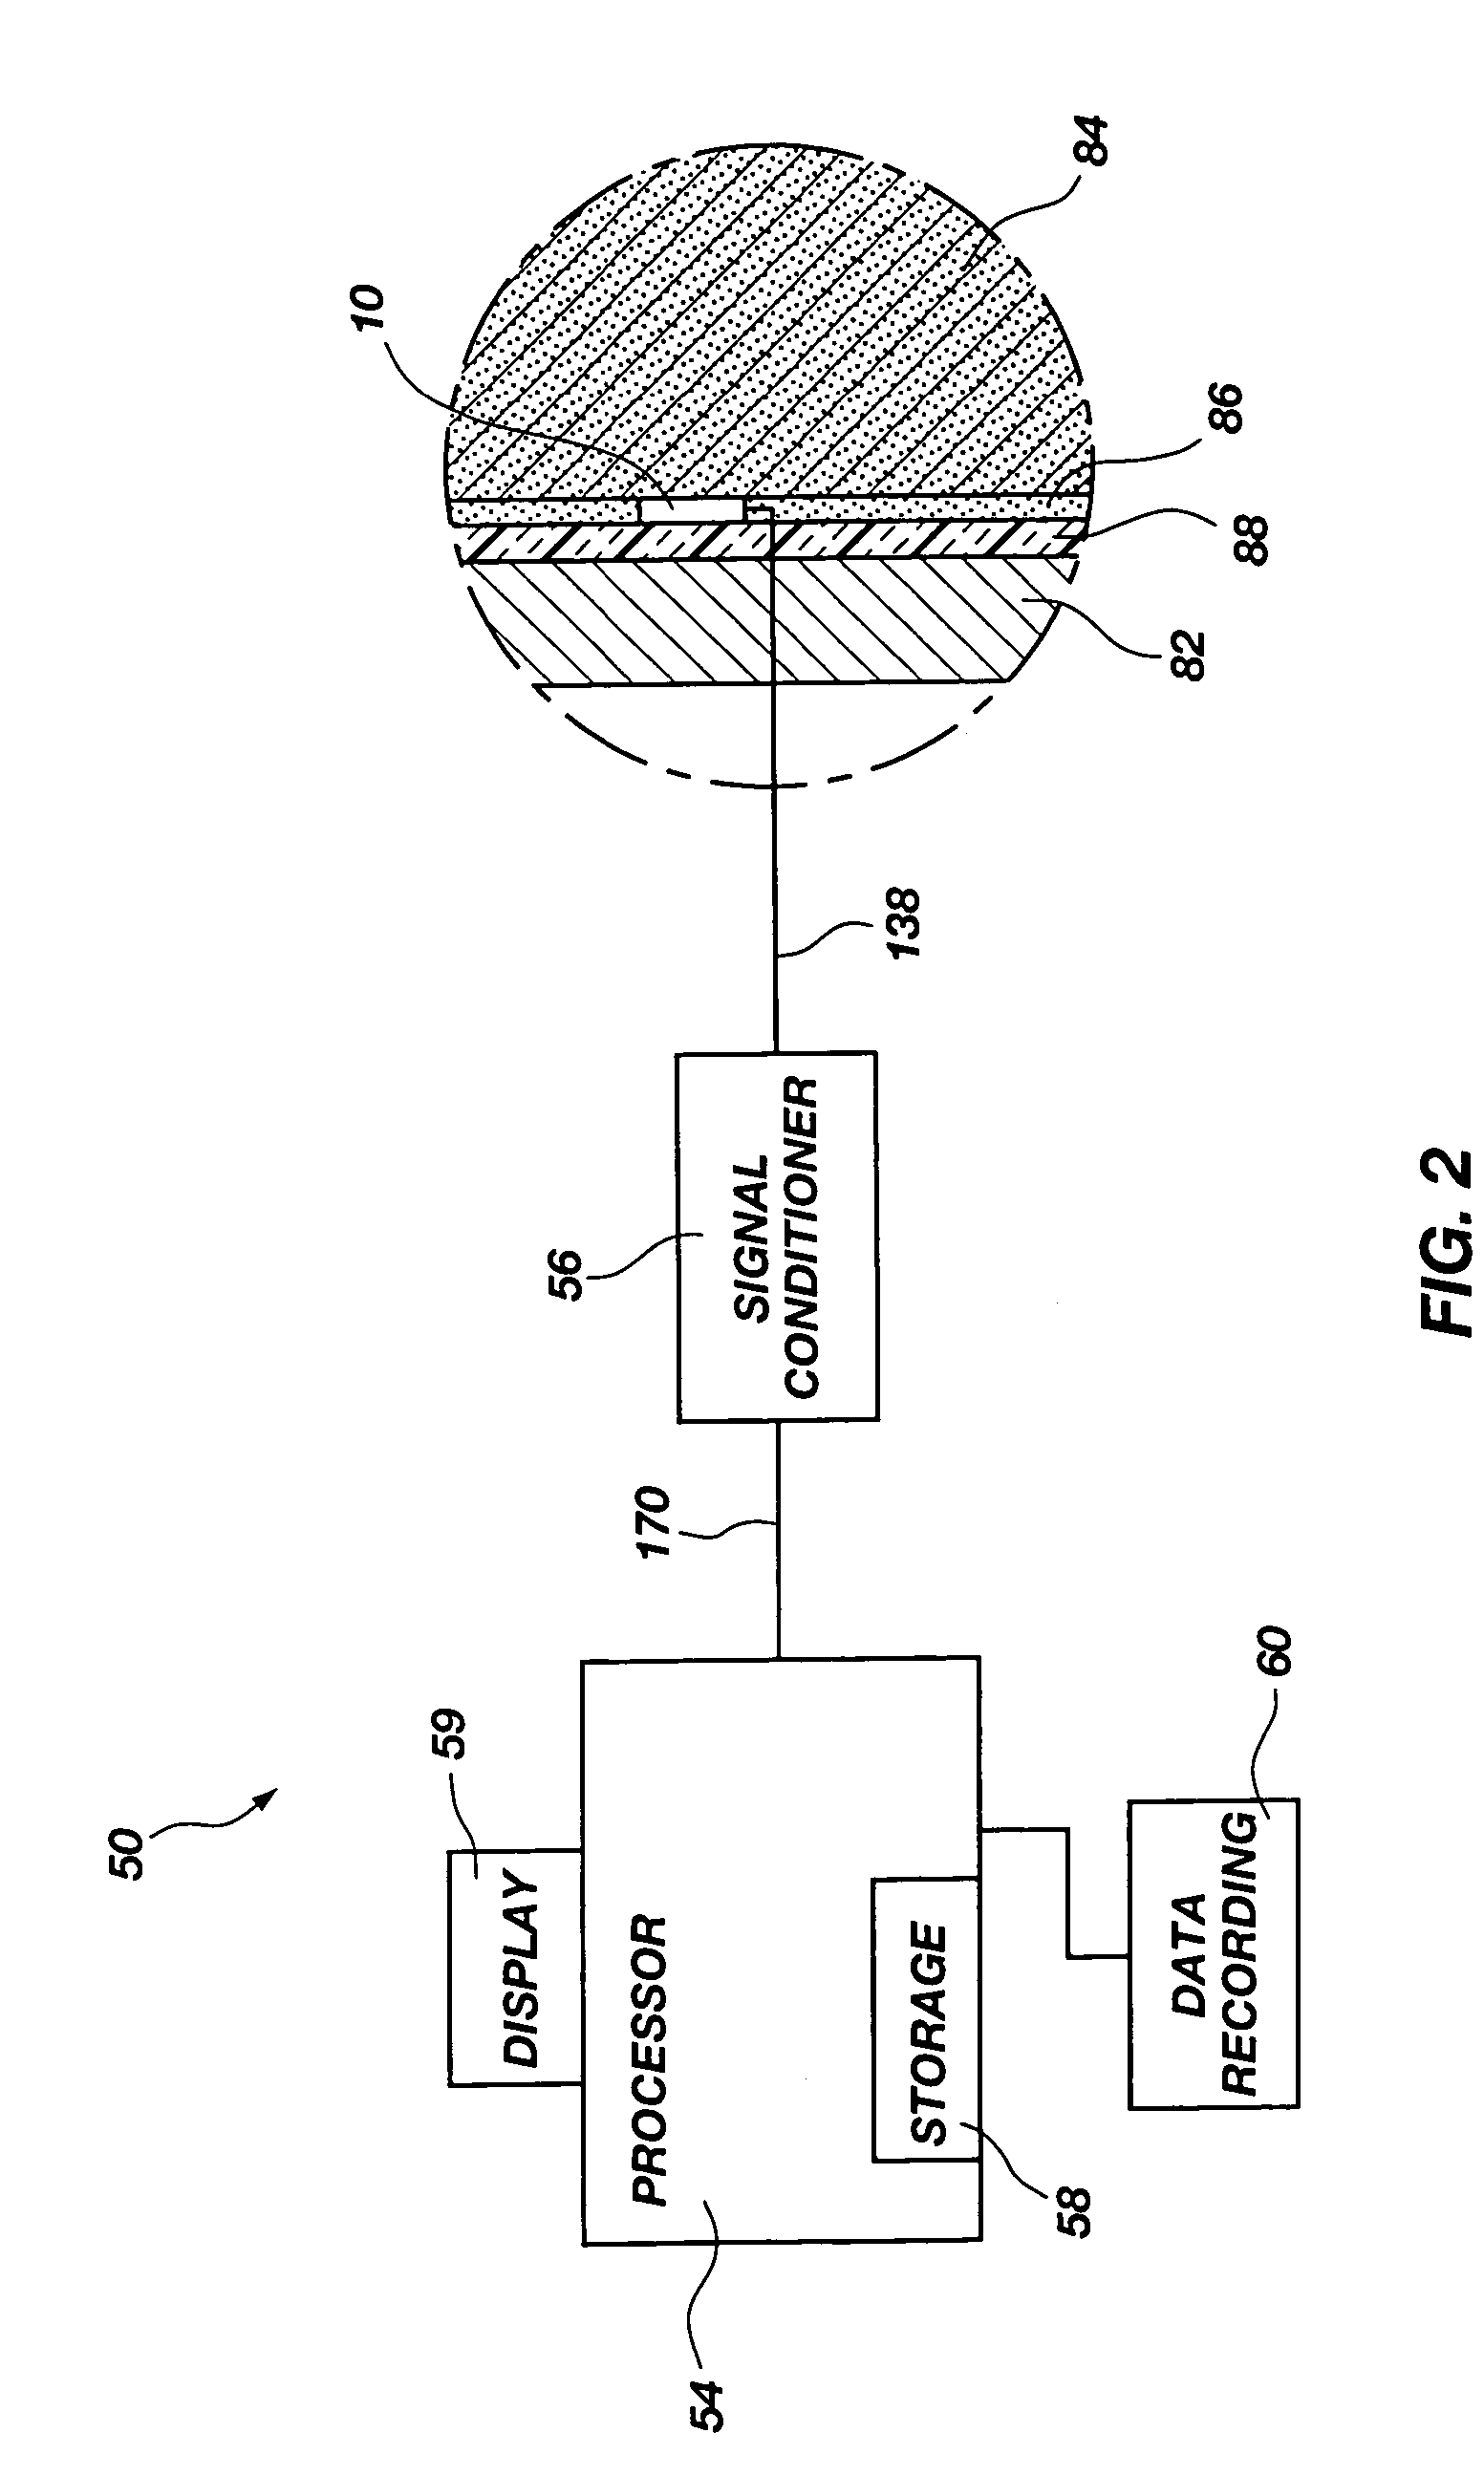 Apparatus and method for measuring stress at an interface